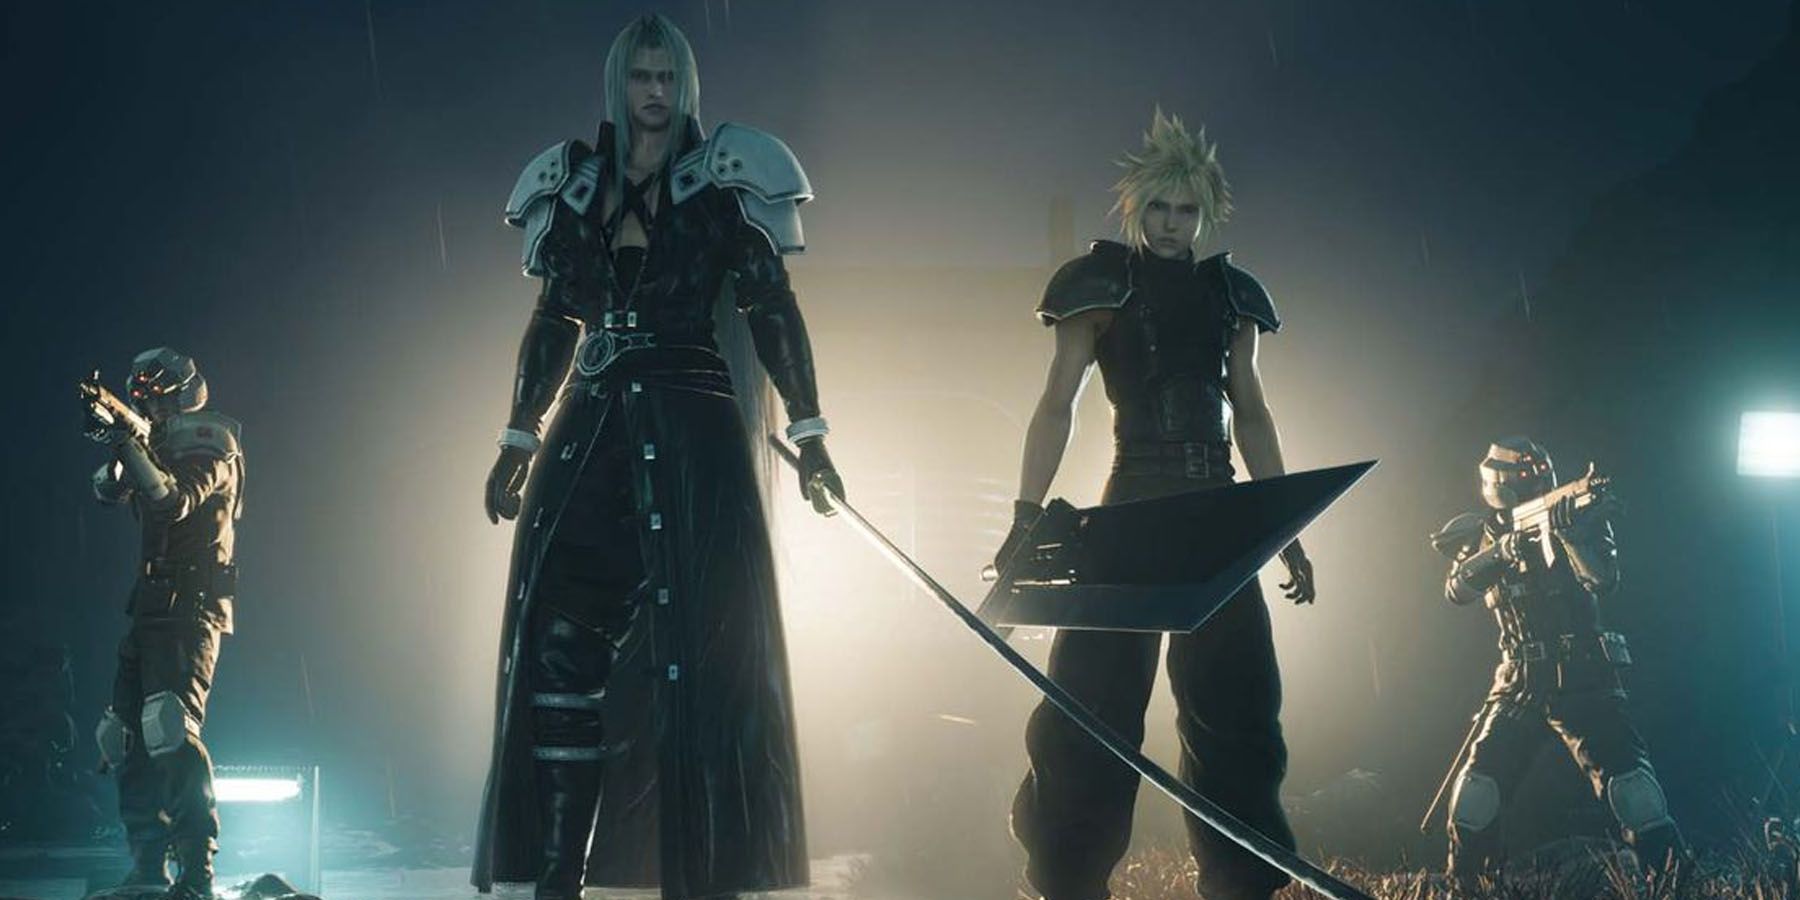 A screenshot of Cloud, Sephiroth, and a pair of Shinra grunts in Final Fantasy 7 Rebirth.